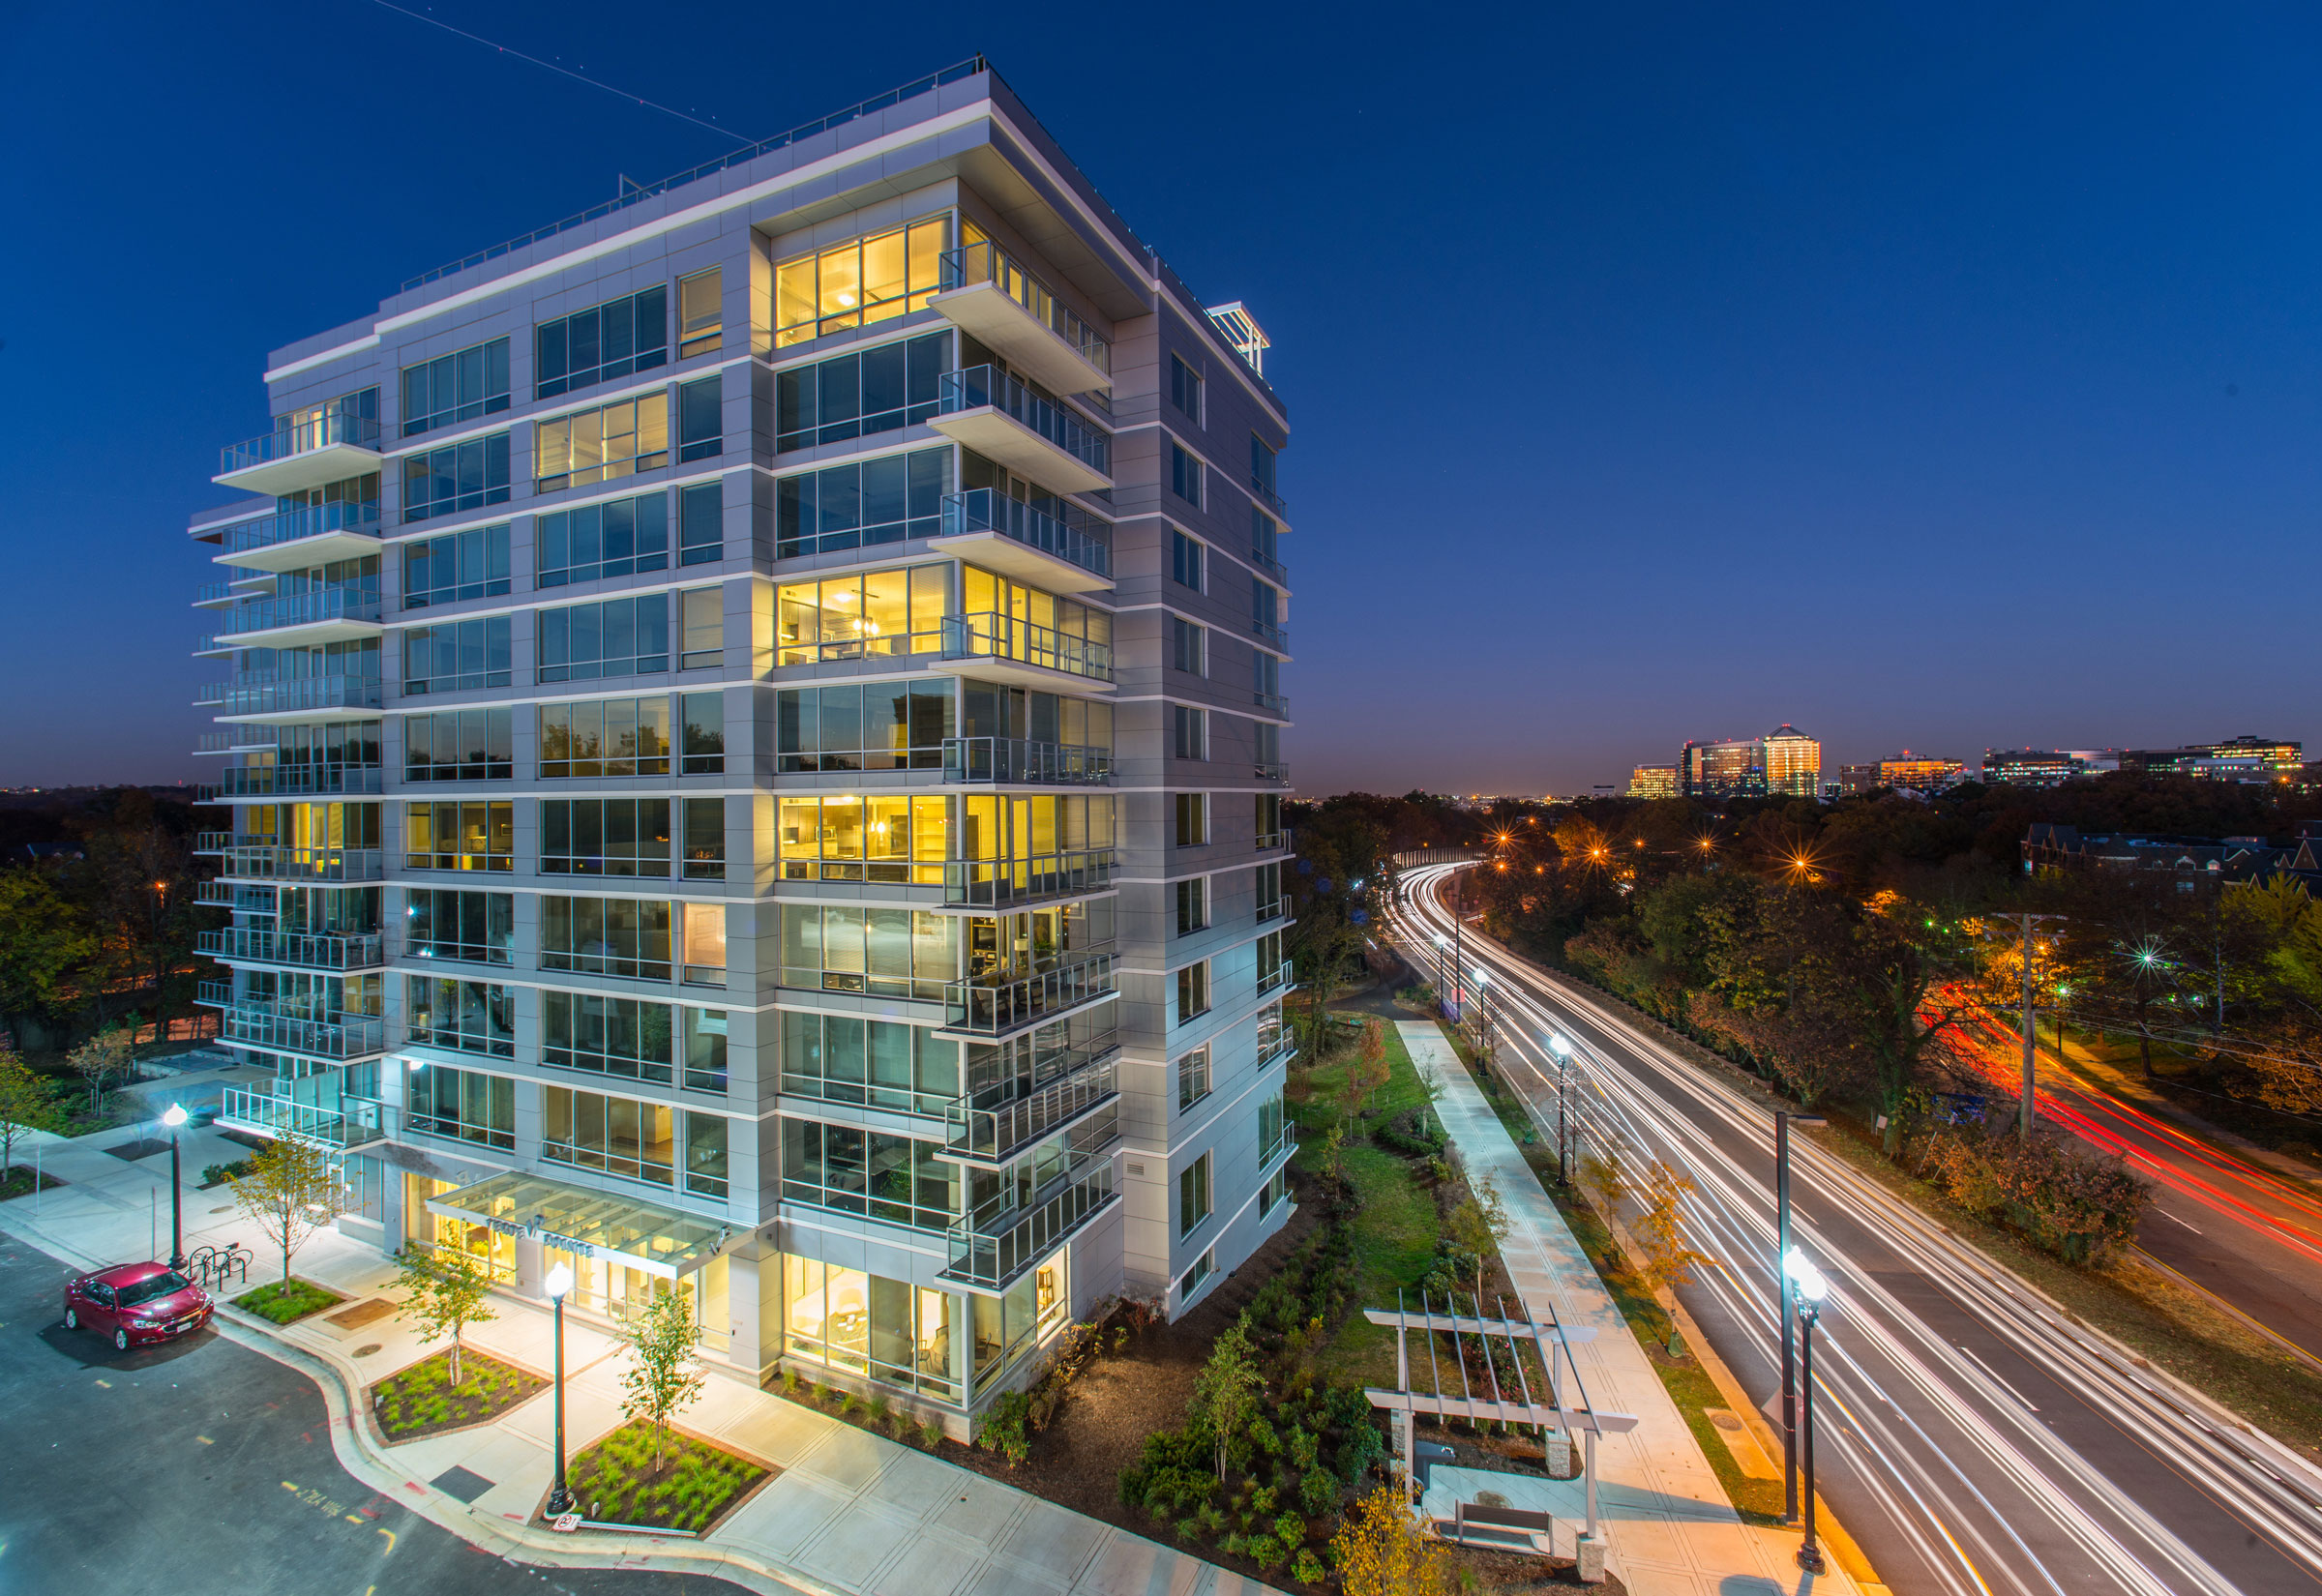 How Glass and Framing Systems in Multifamily Buildings Can Impact Health